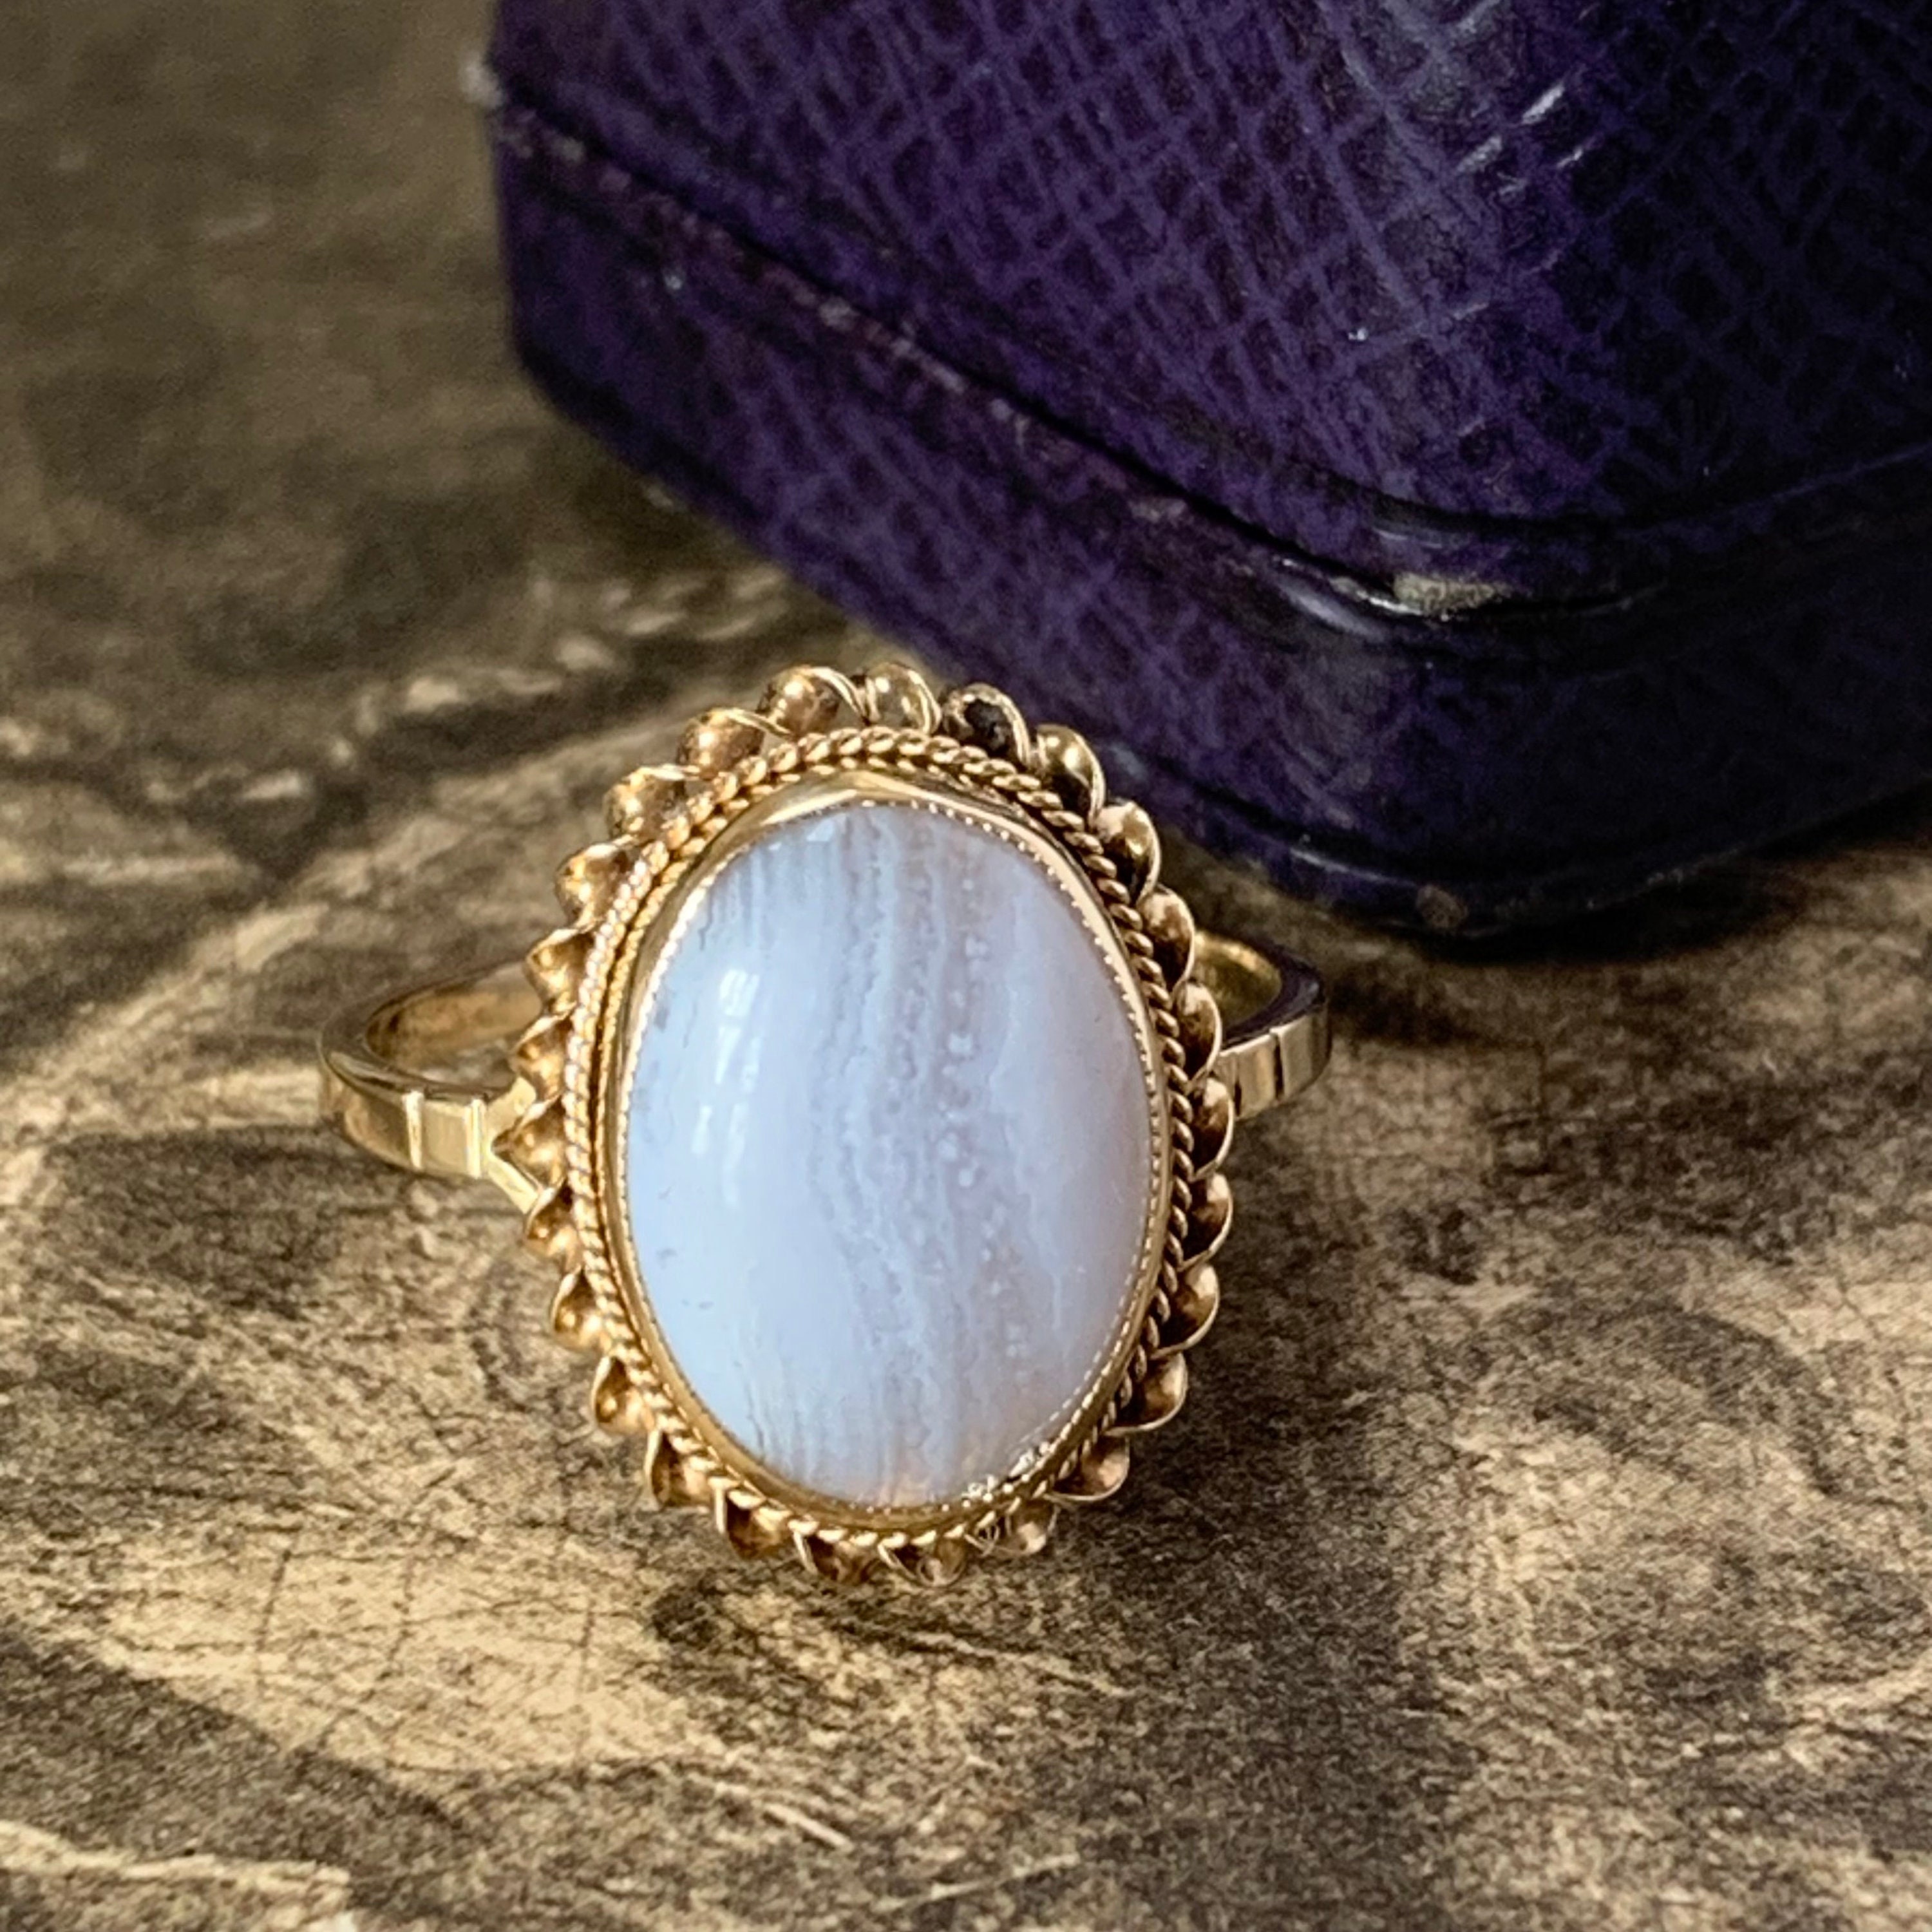 1970S Vintage 9Ct Gold Pale Grey Lace Agate Ring. A Dazzling Cocktail Dress Accessory With The Timeless Appeal Of Jewellery